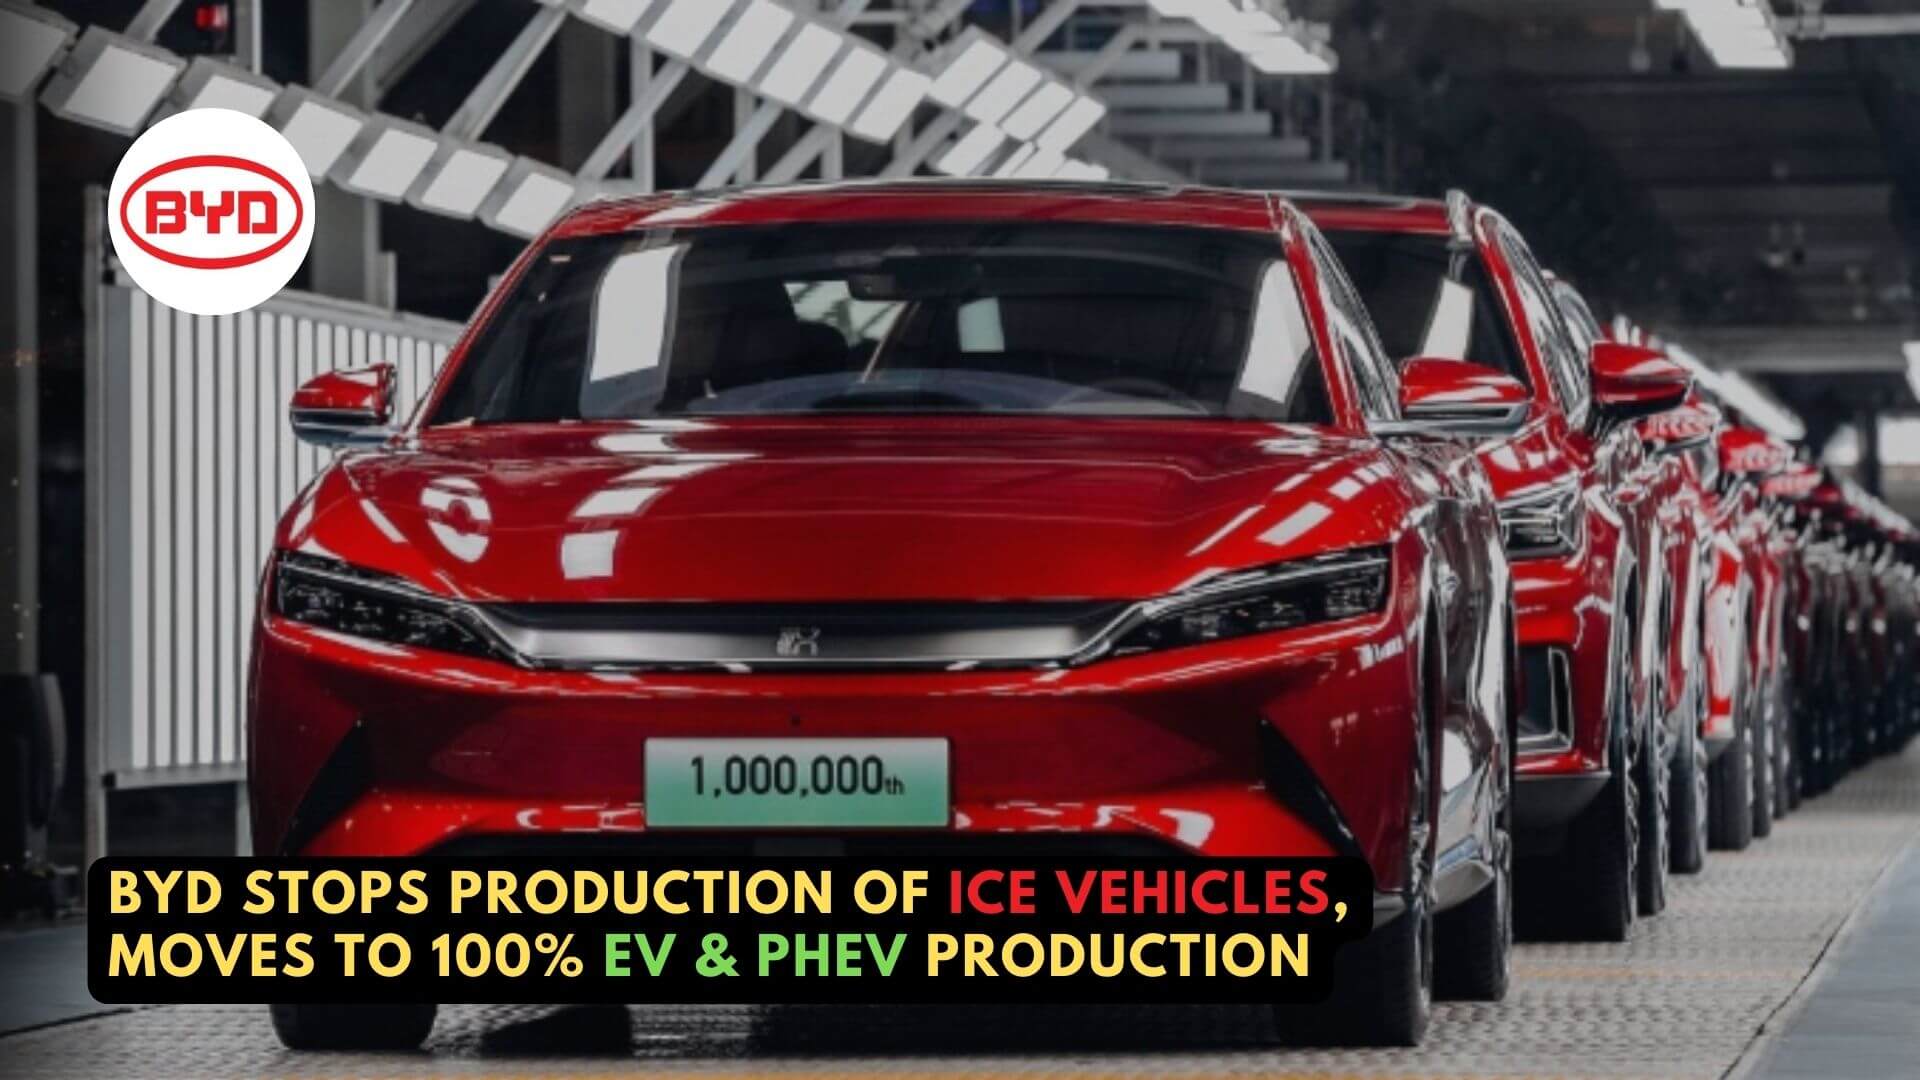 https://e-vehicleinfo.com/byd-stops-production-of-ice-vehicles-moves-to-ev-phev-production/